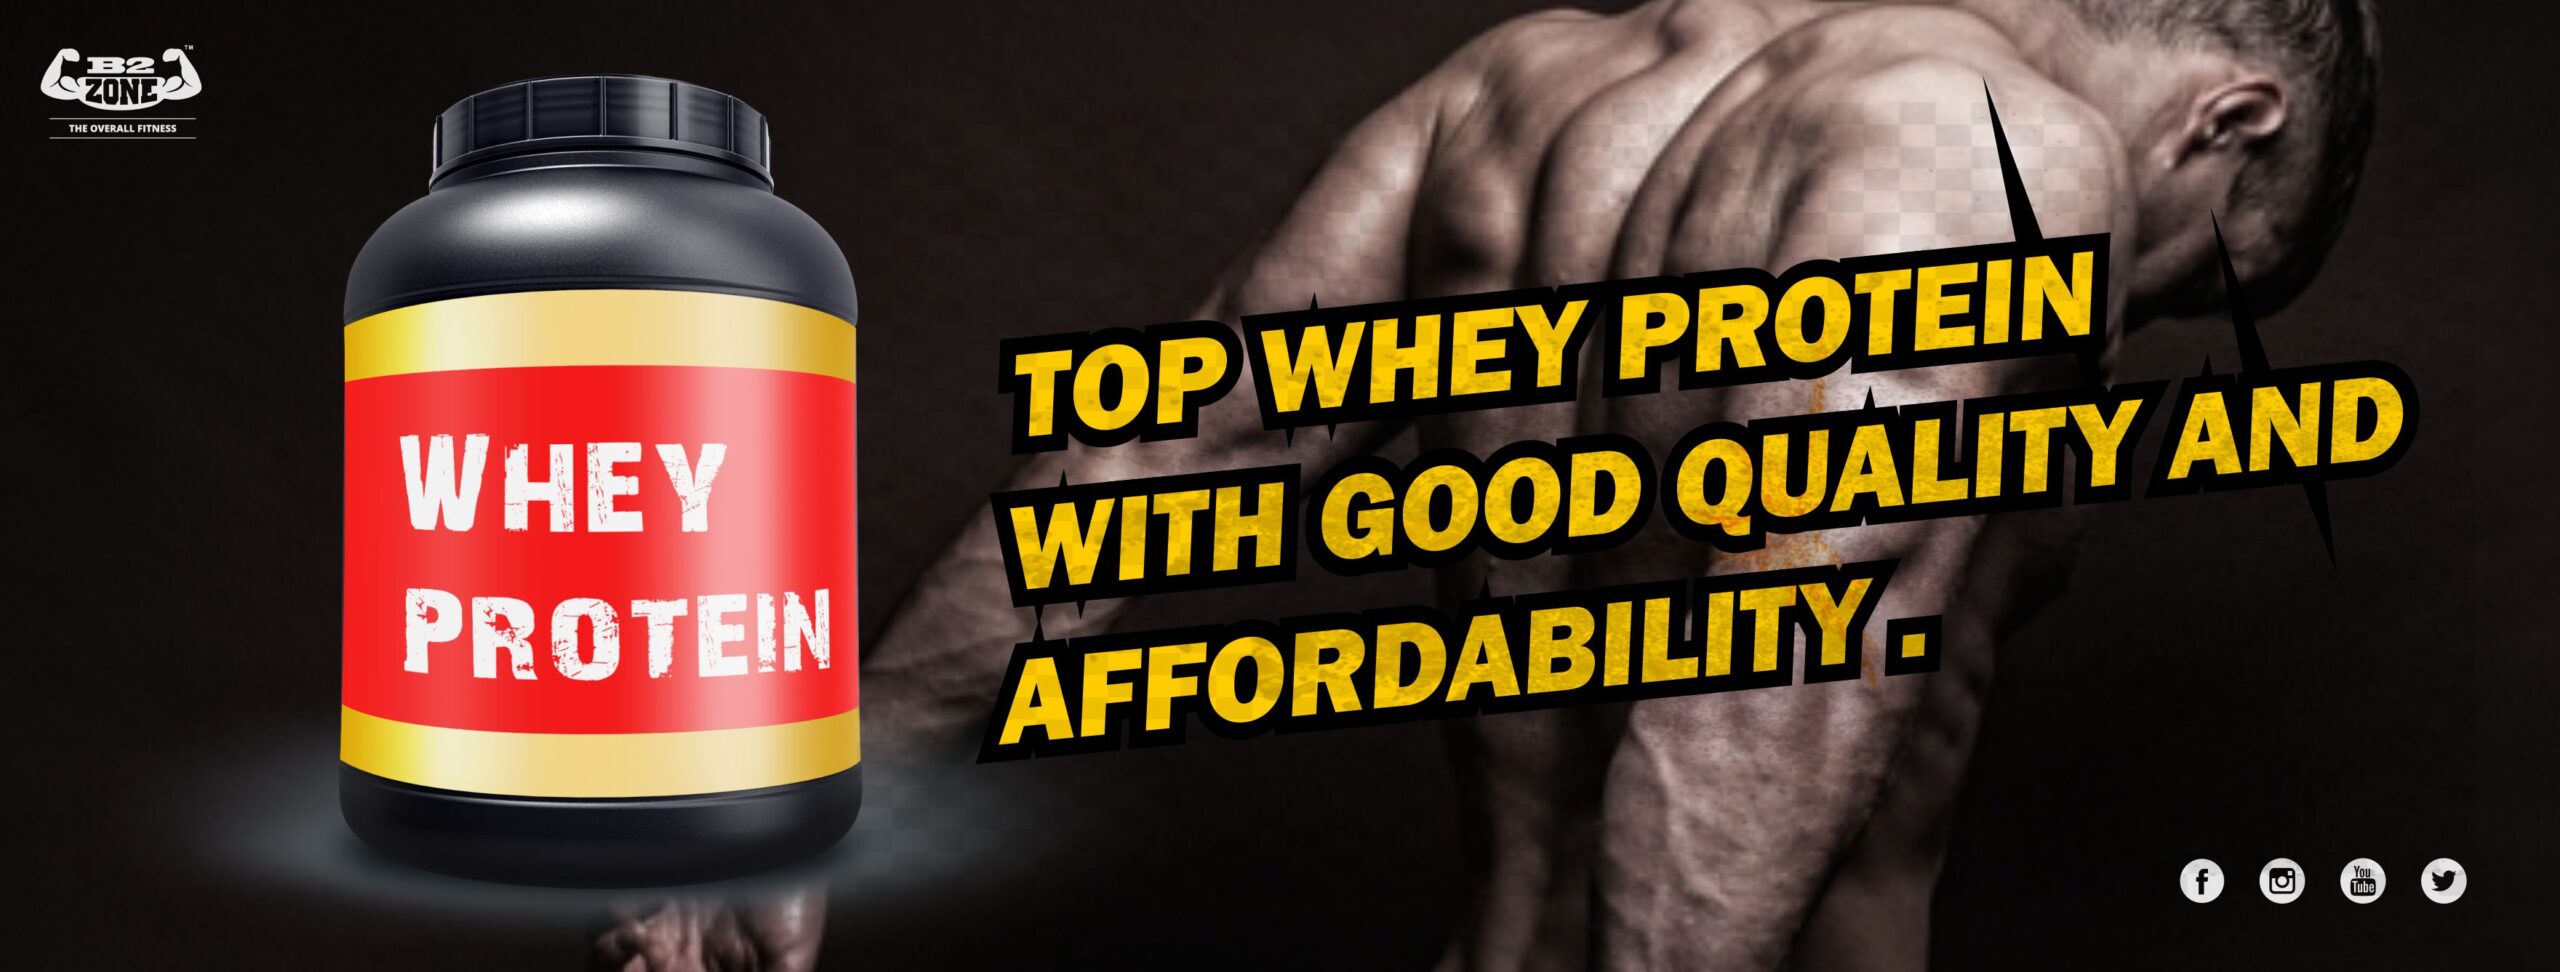 Top Indian whey protein with good quality and affordability. -